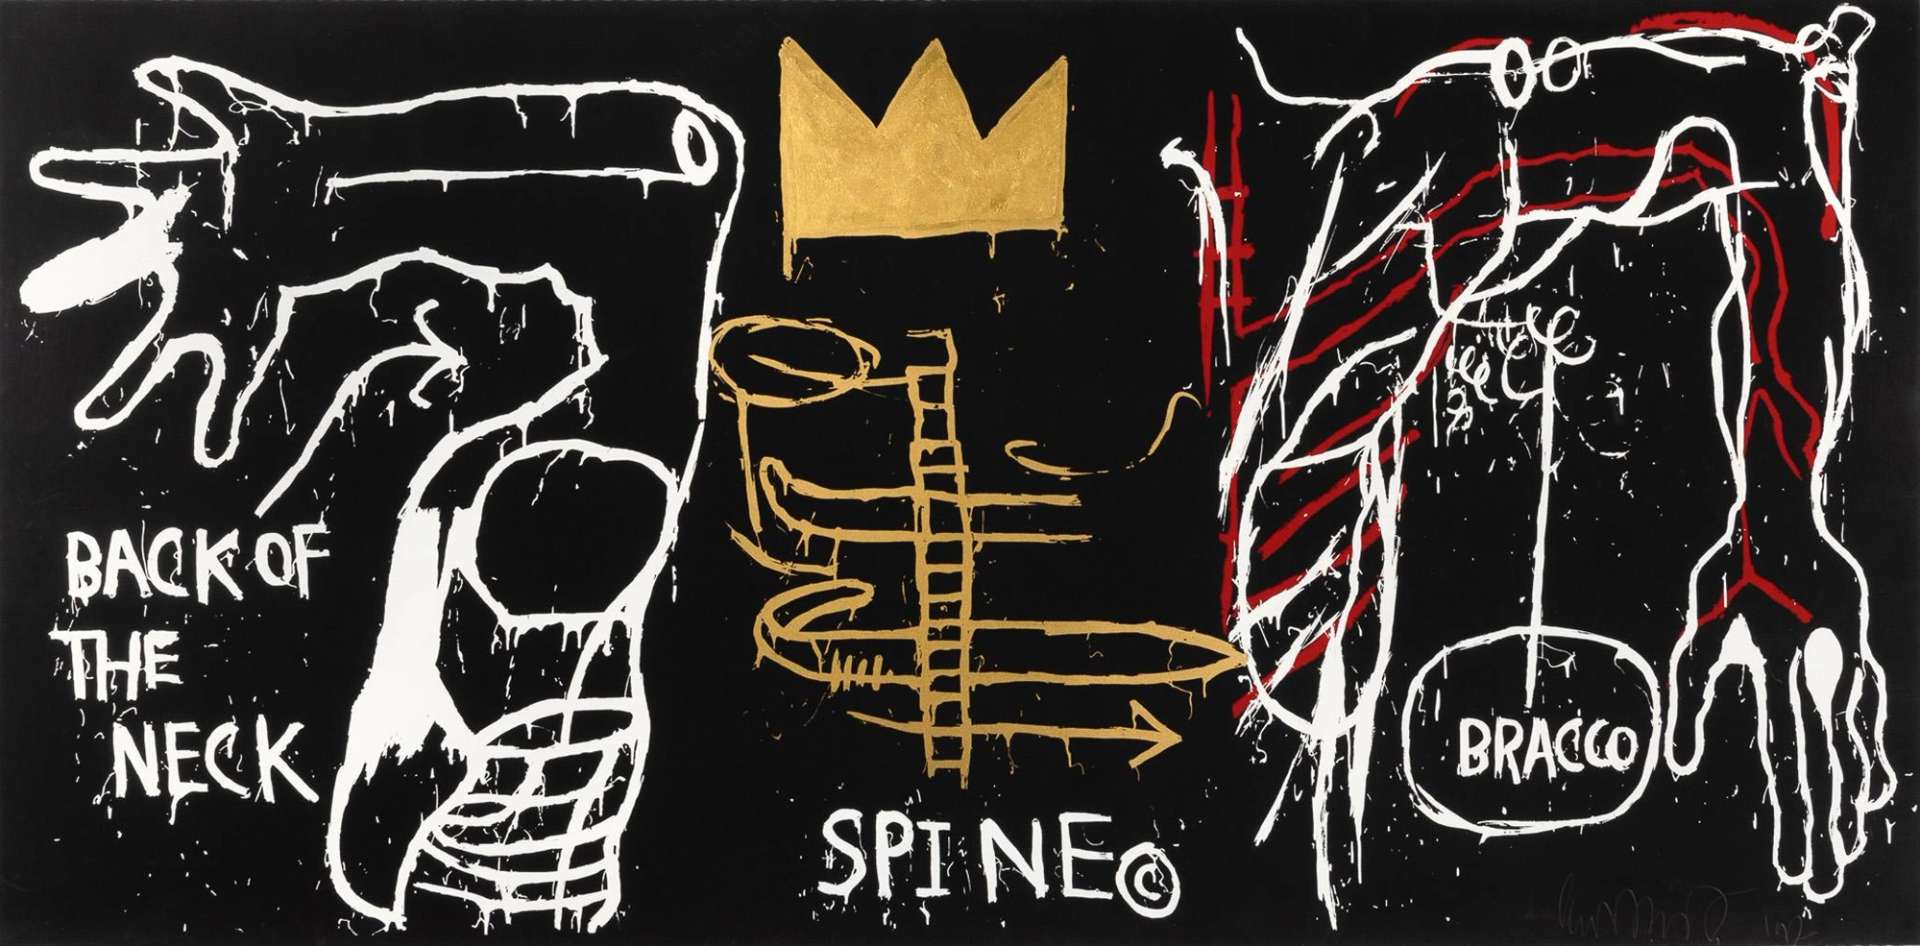 A screenprint by Jean-Michel Basquiat featuring large, warped impressions of a muscular body in stark colours against the piece’s black background.